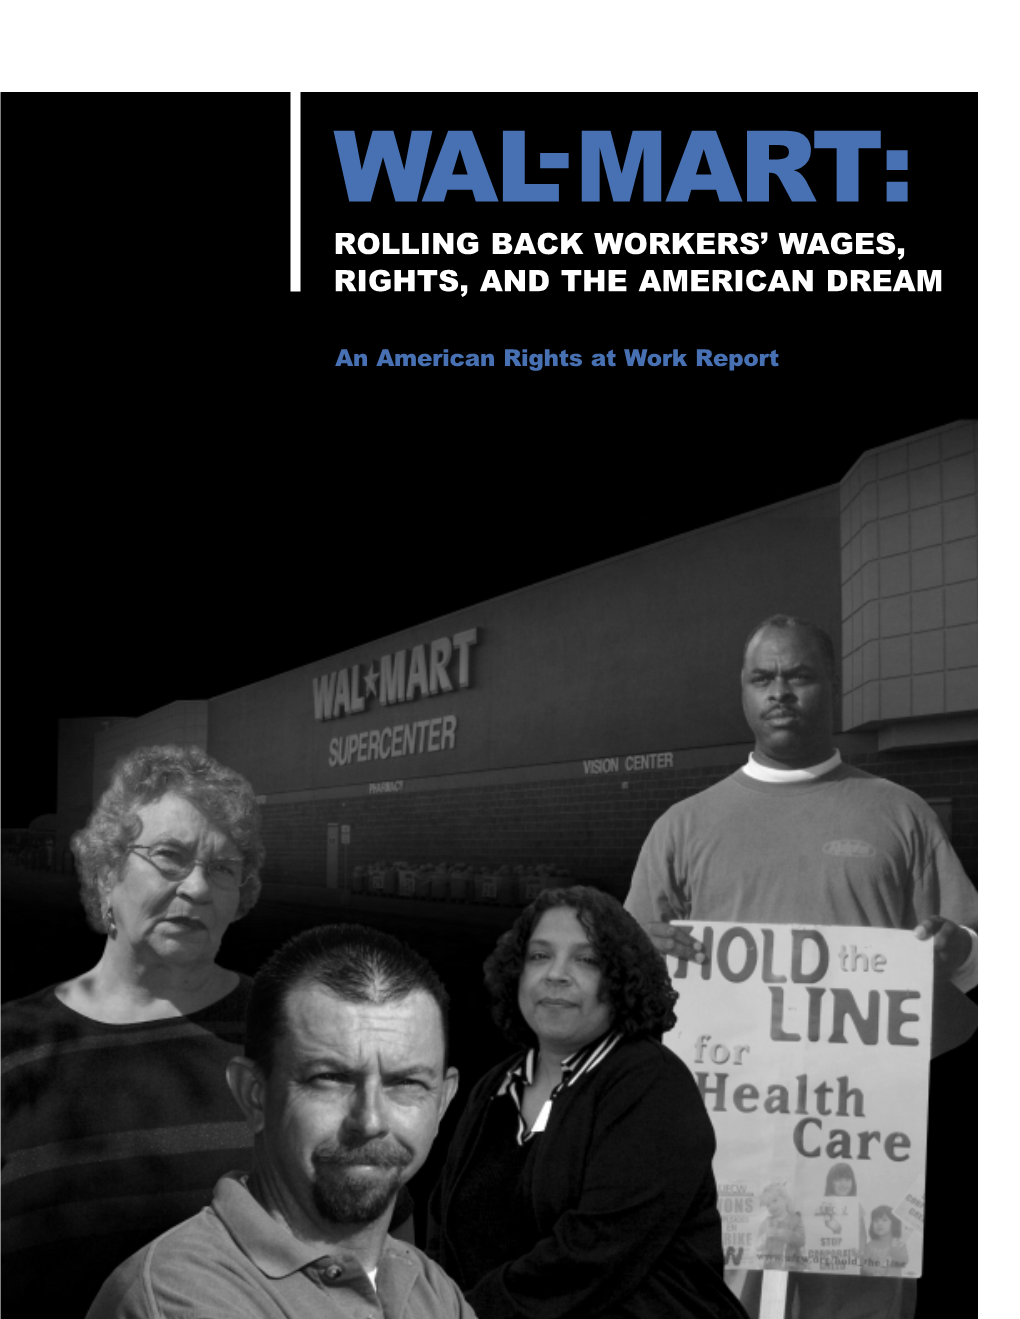 Wal-Mart: Rolling Back Workers’ Wages, Rights, and the American Dream